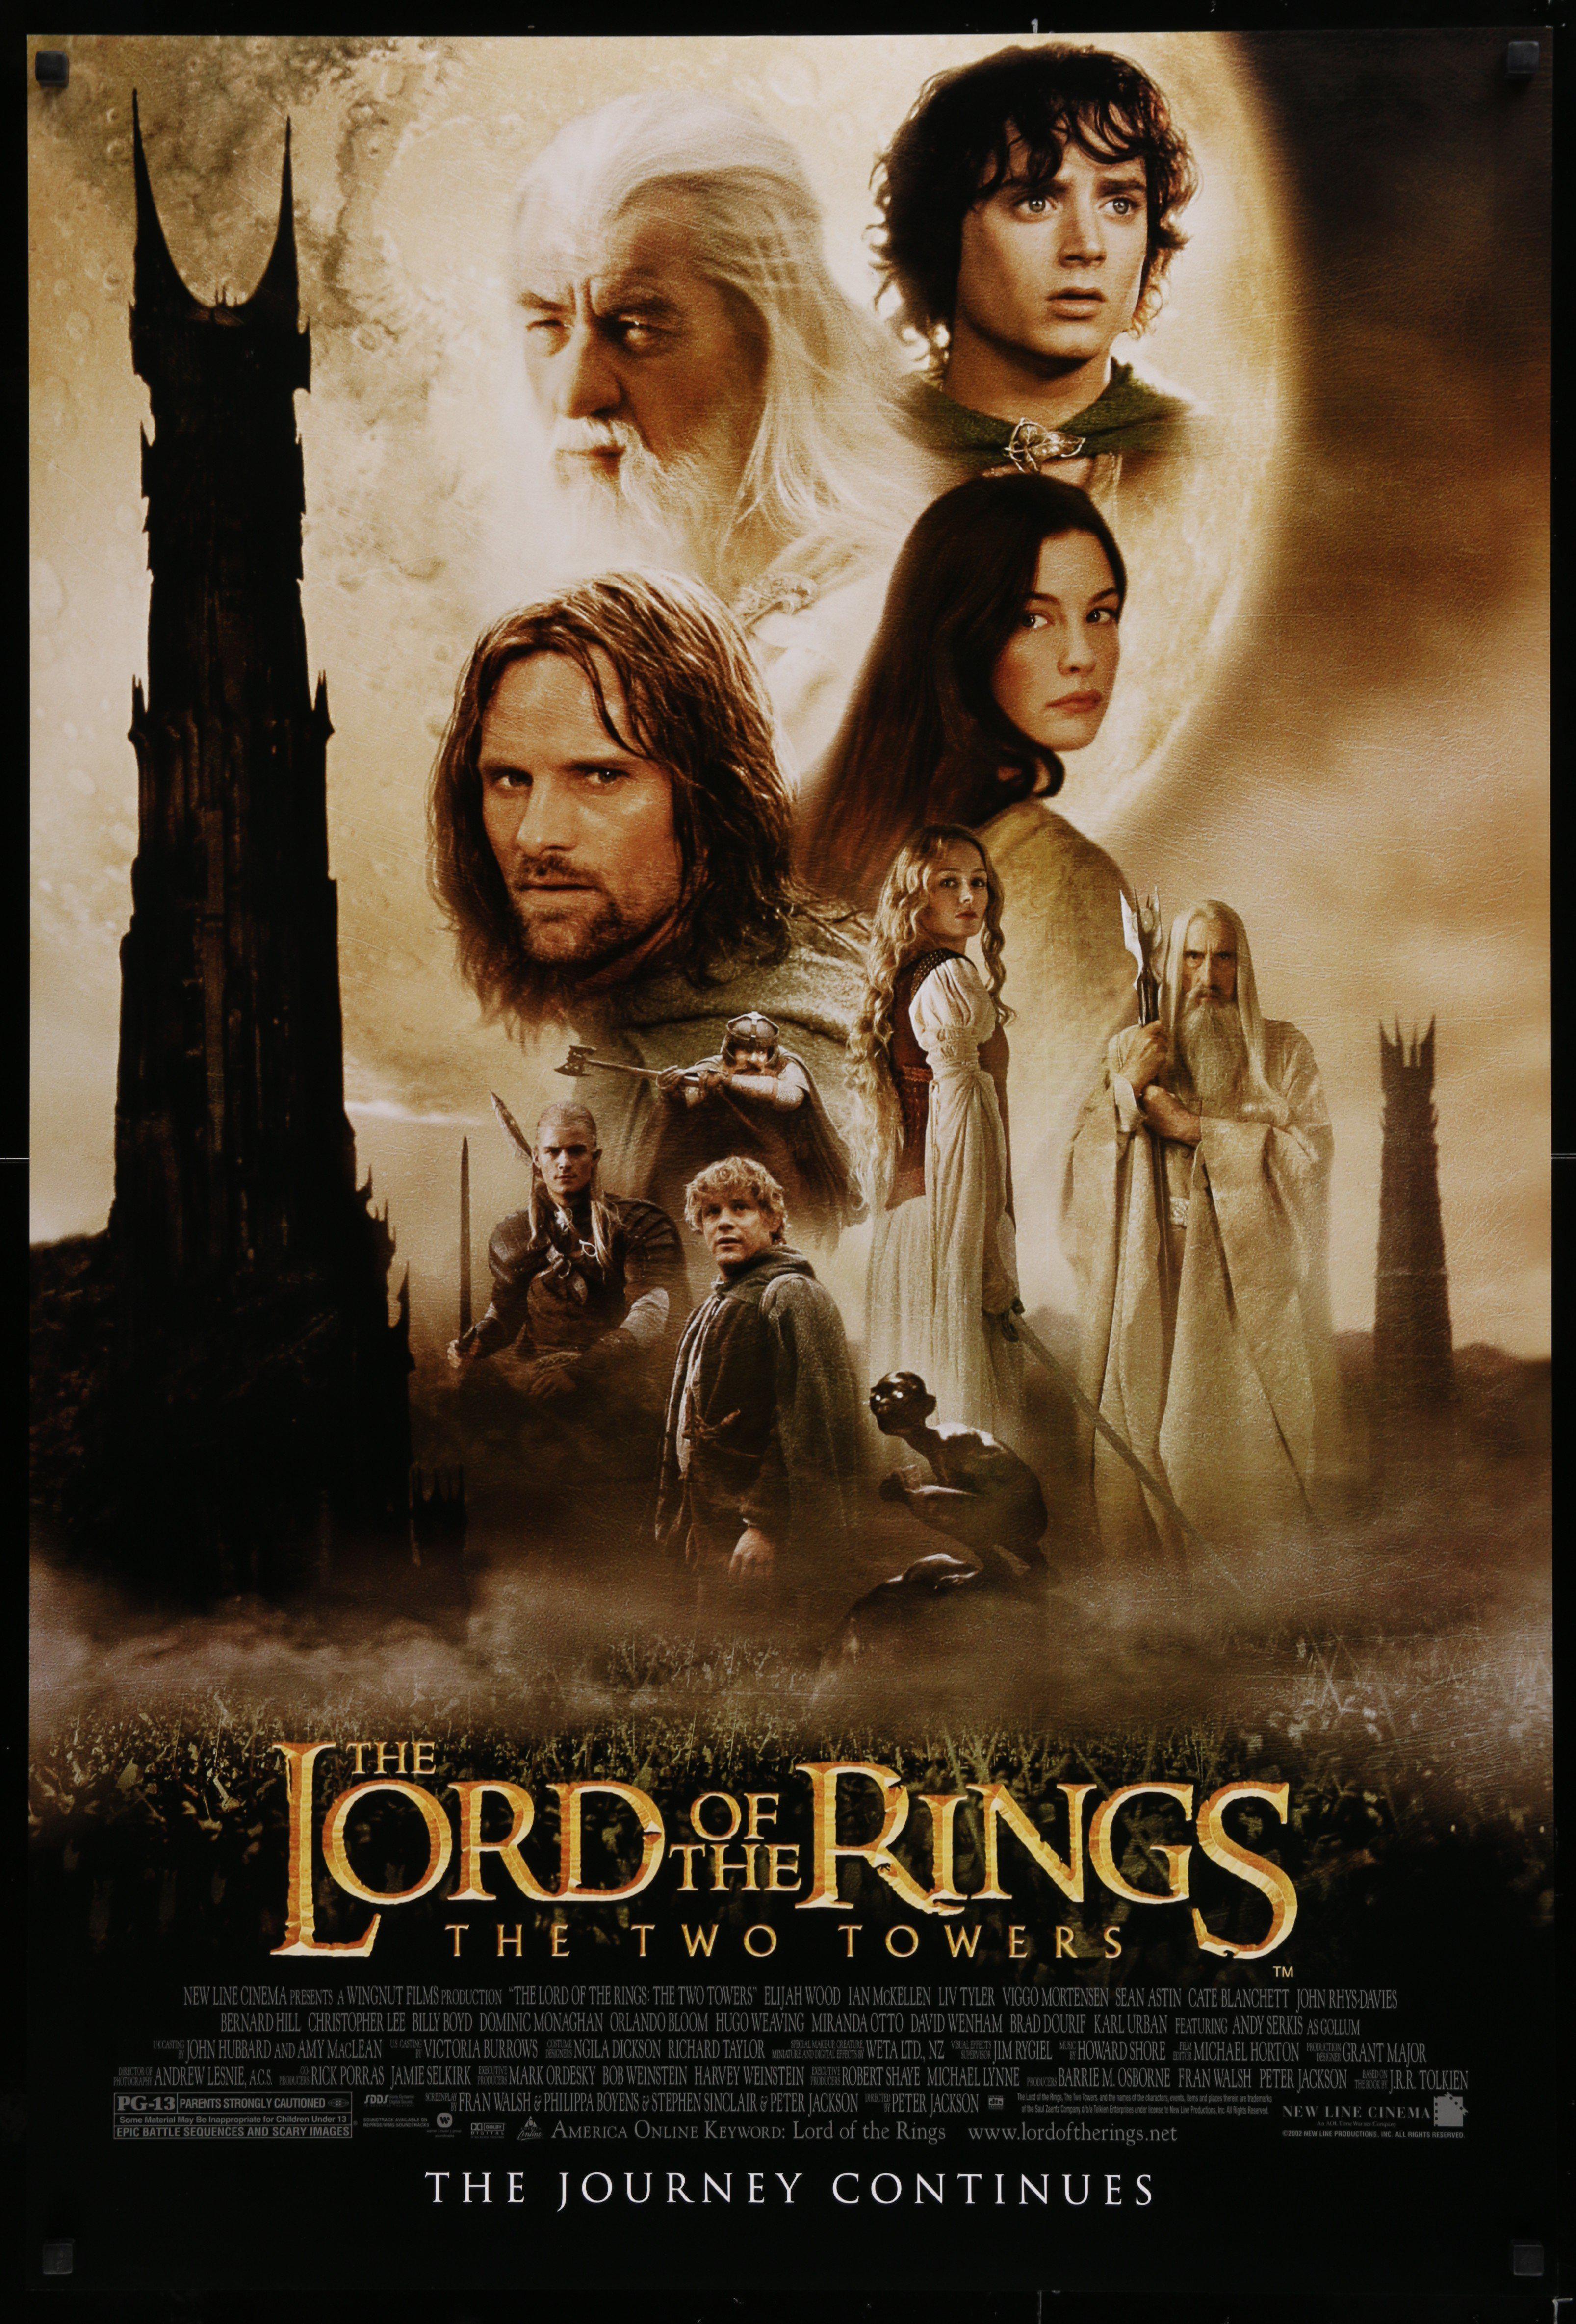 The Lord of the Rings: The Fellowship of the Ring (Original Motion